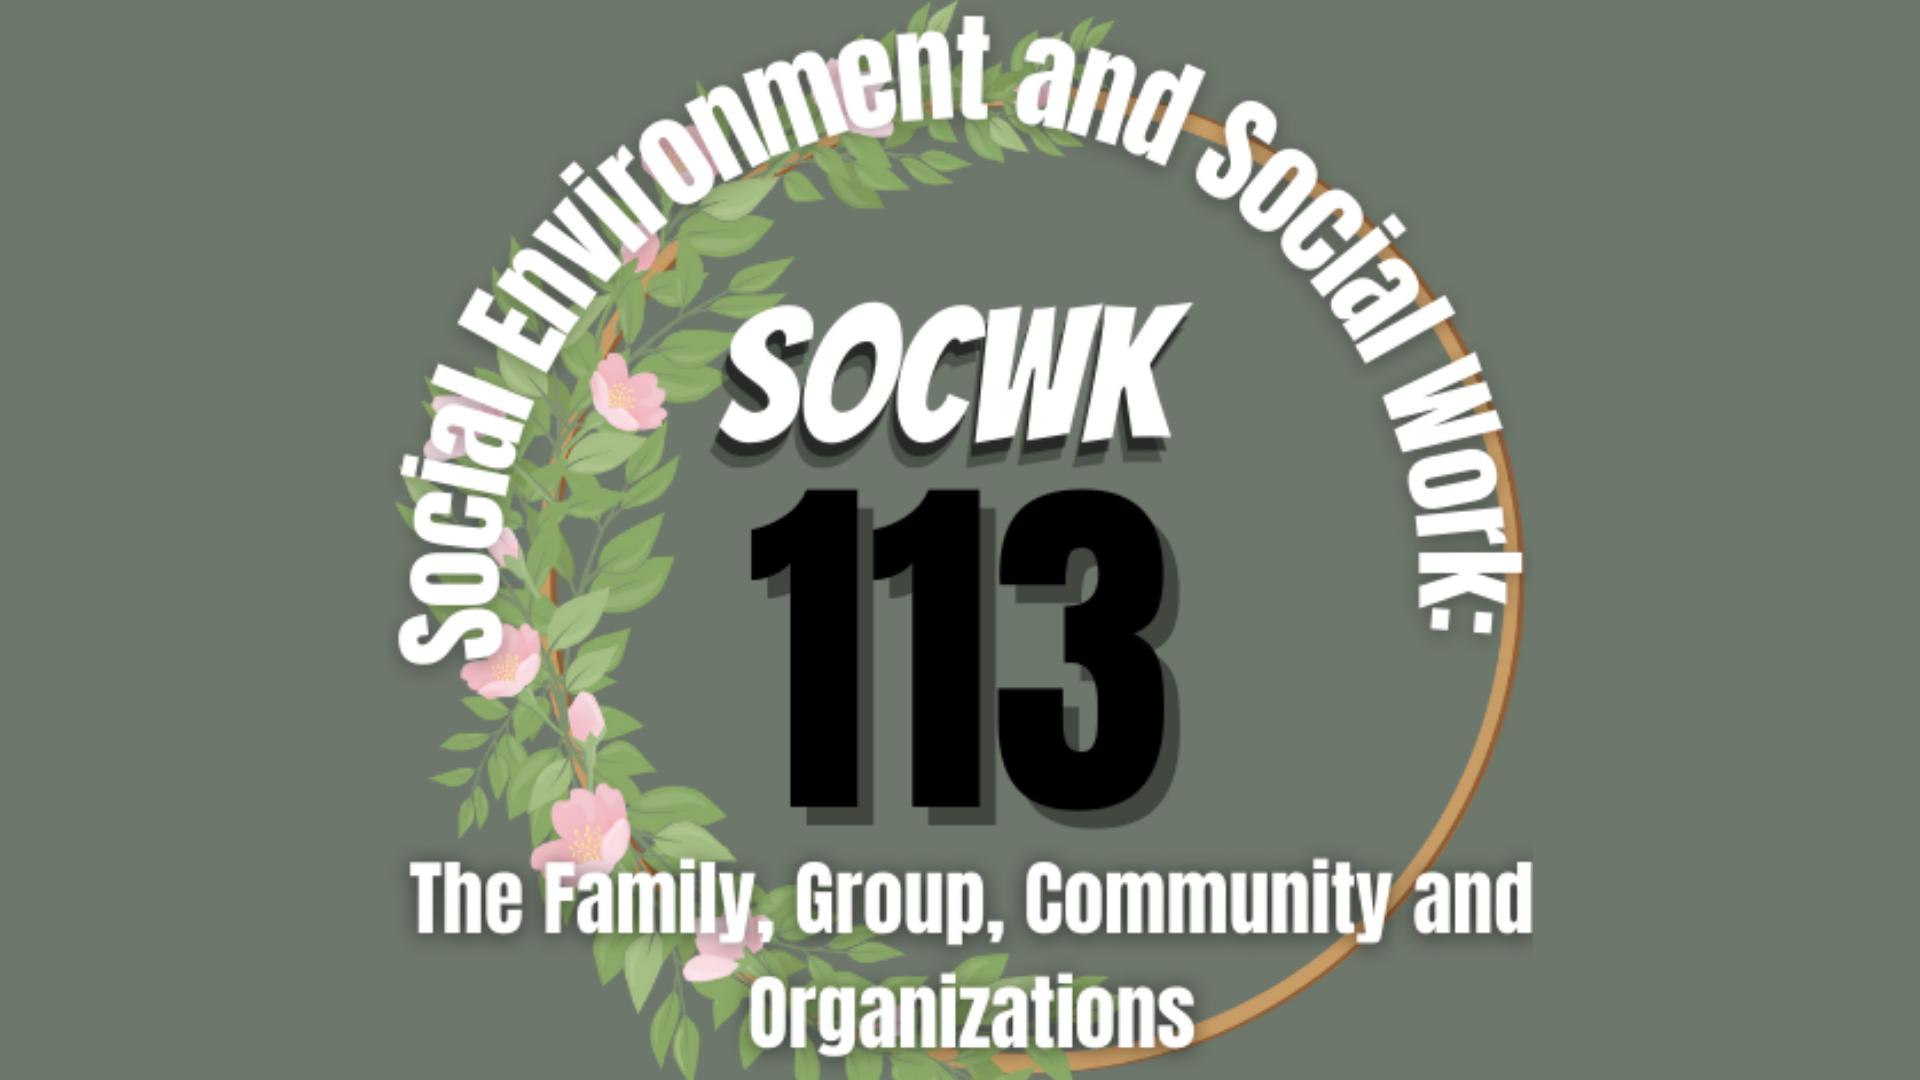 Social Environment and Social Work: The Family, Group, Community and Organizations